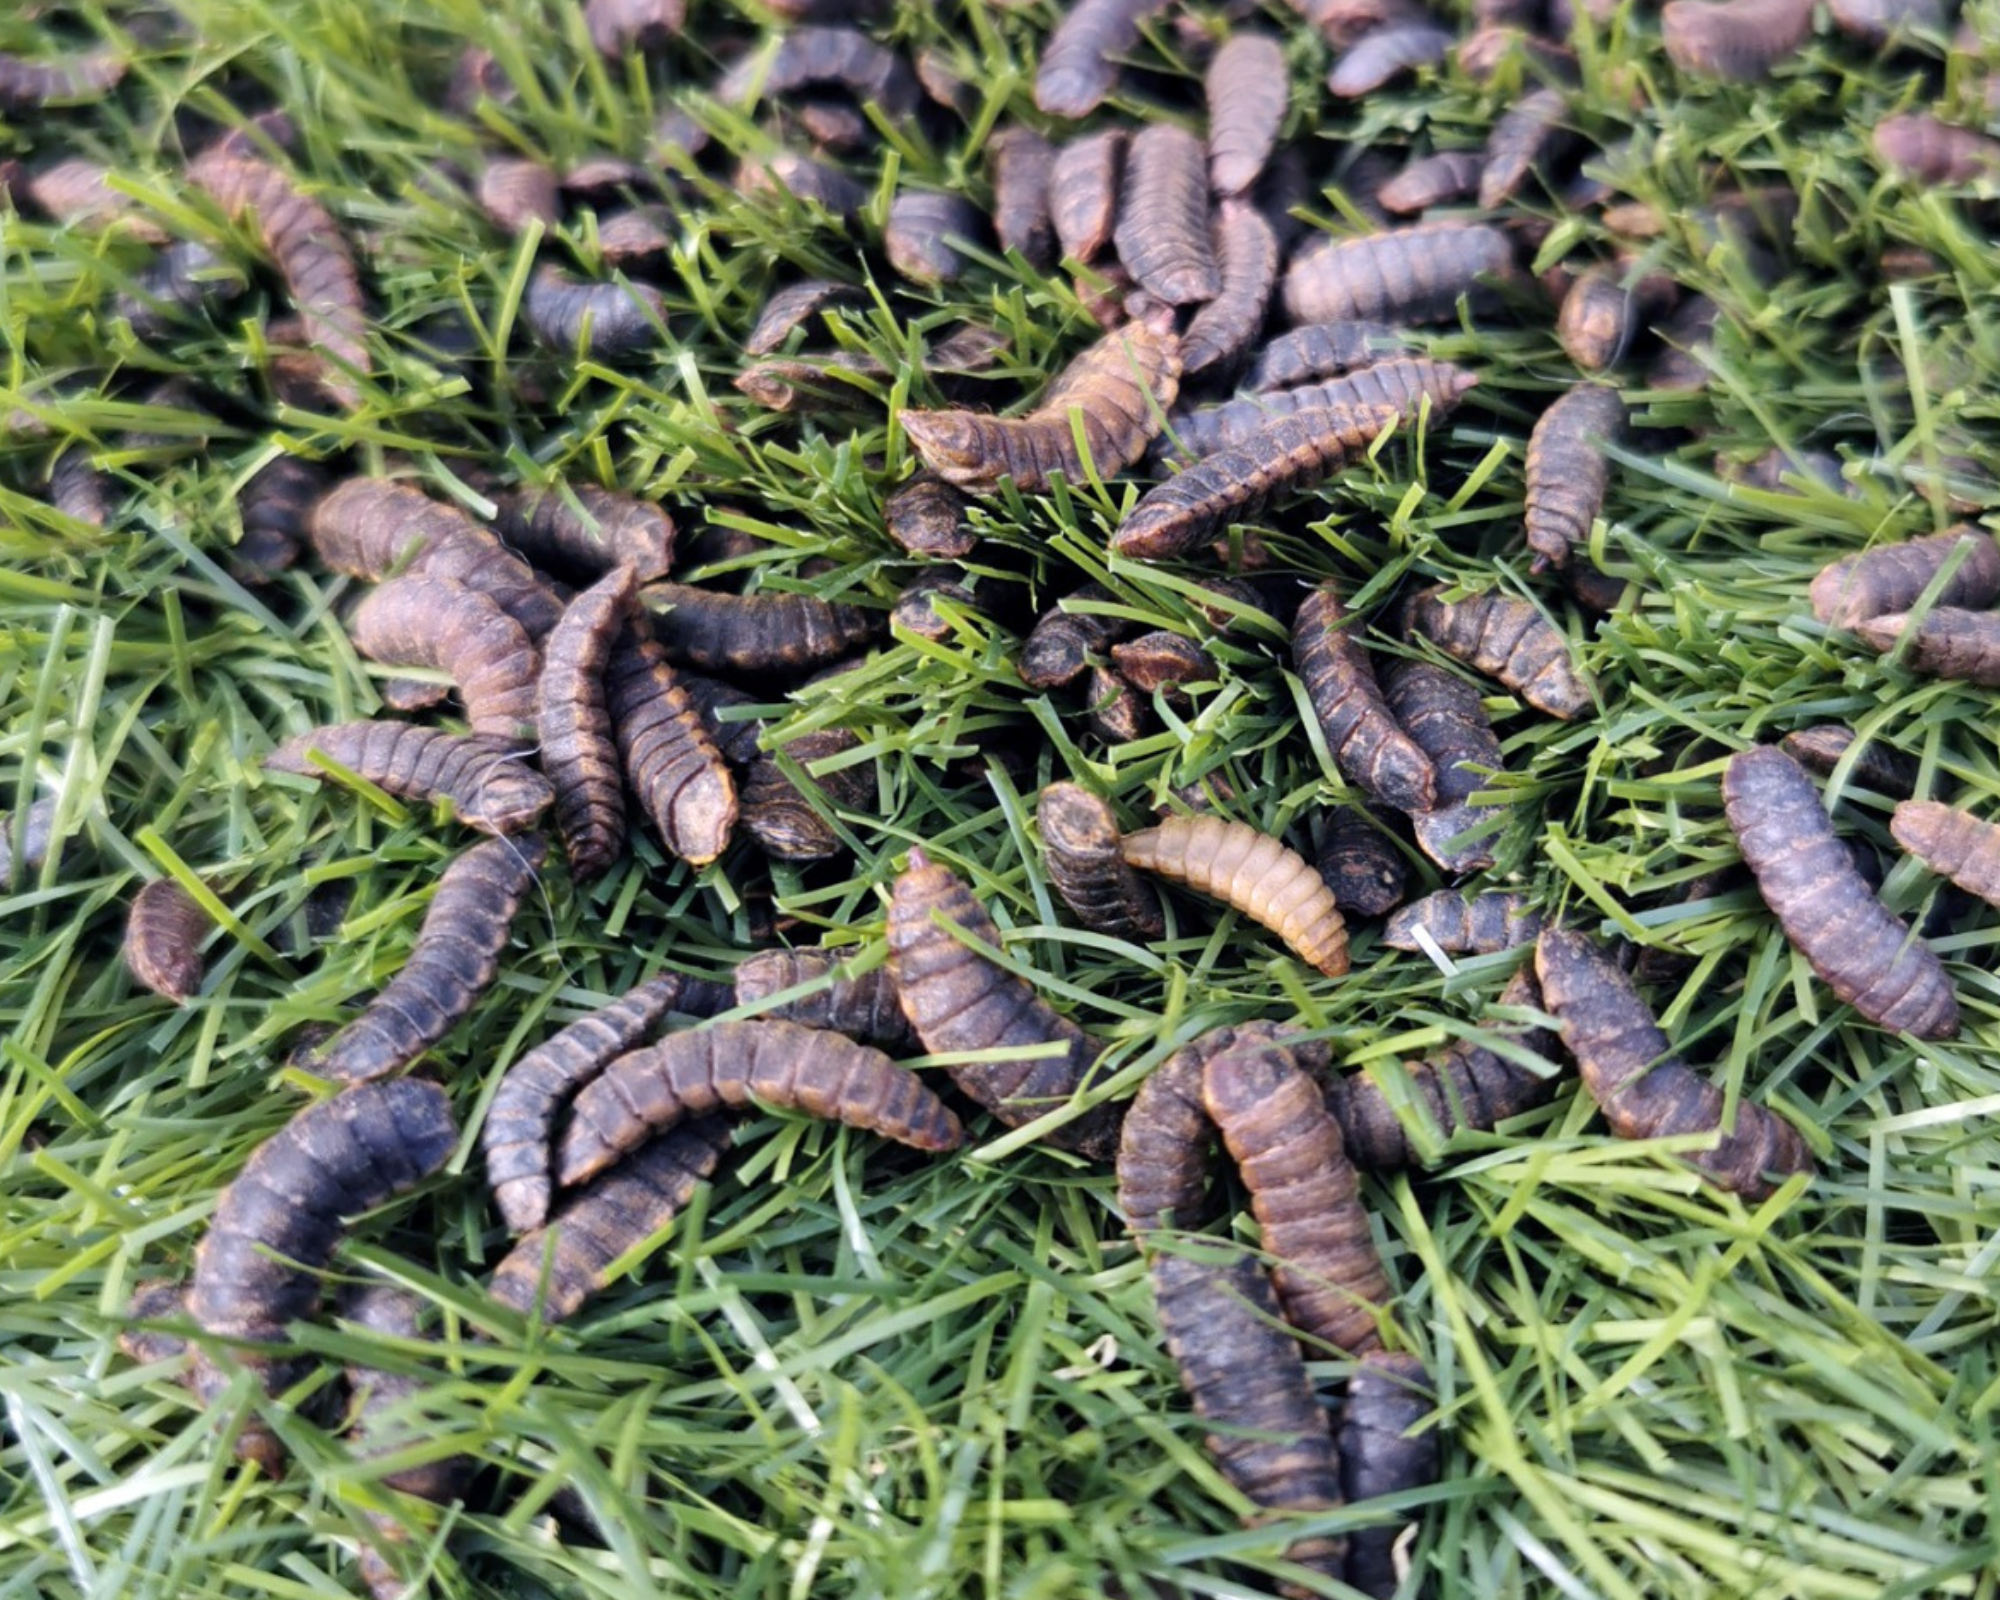 live black soldier fly larvae in grass